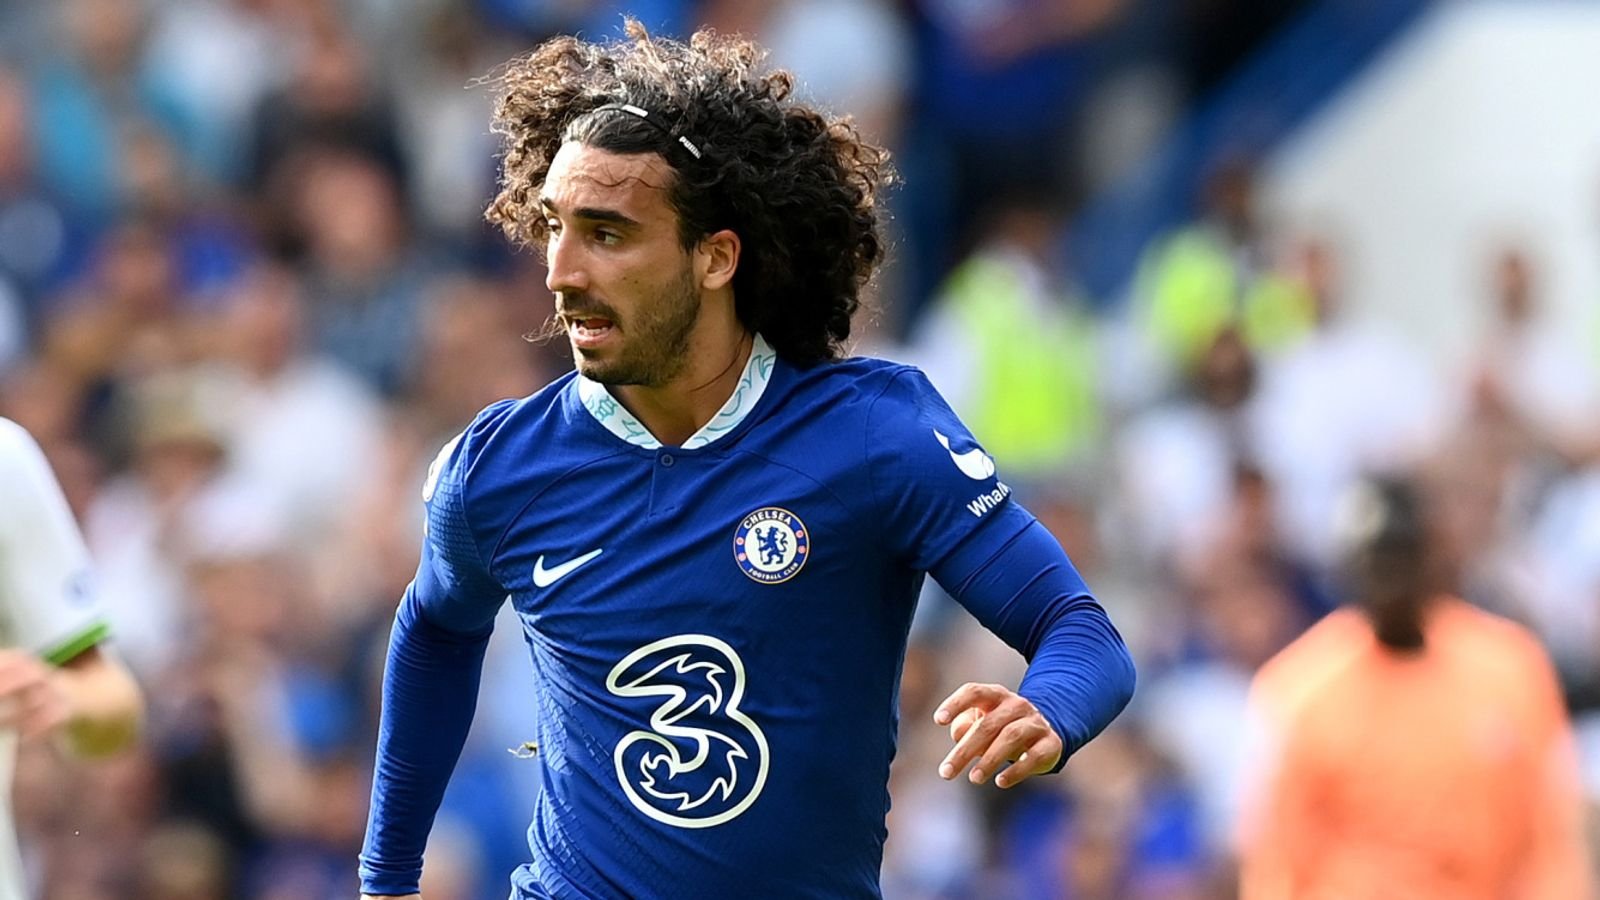 Marc Cucurella will struggle to keep his spot at Chelsea